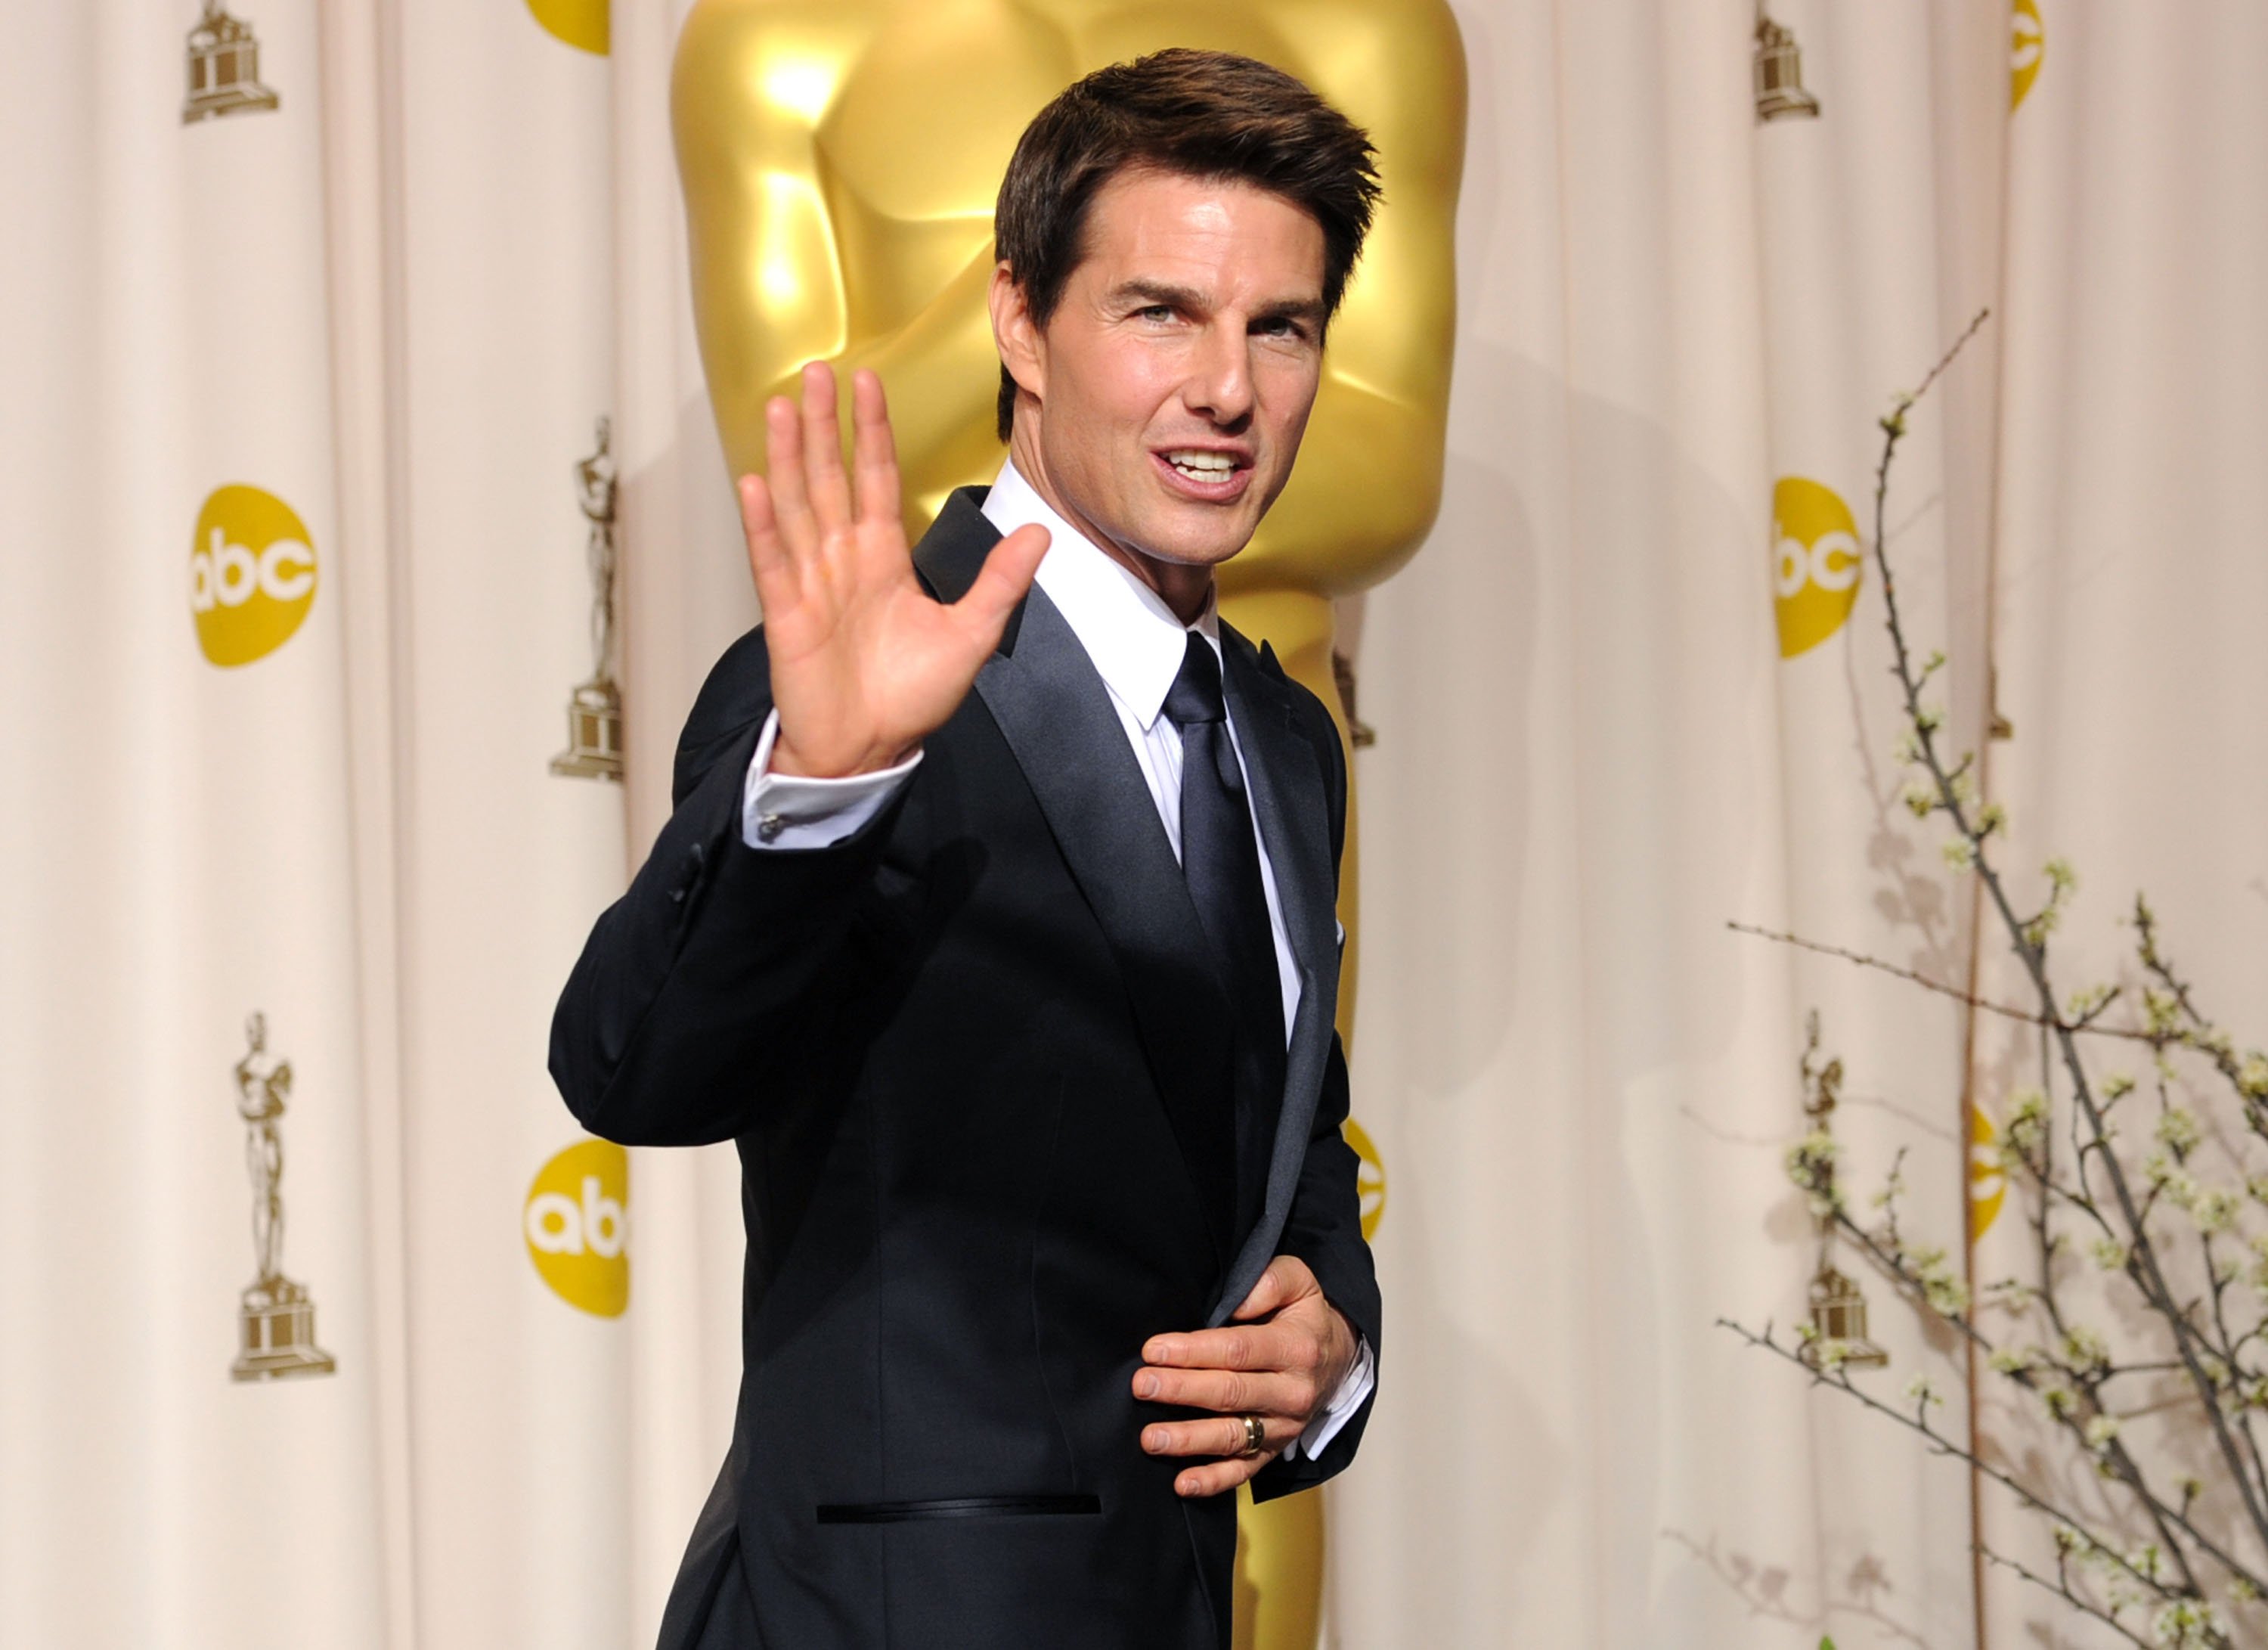 Actor Tom Cruise poses in the press room at the 84th Annual Academy Awards held at the Hollywood & Highland Center on February 26, 2012. | Photo: Getty Images